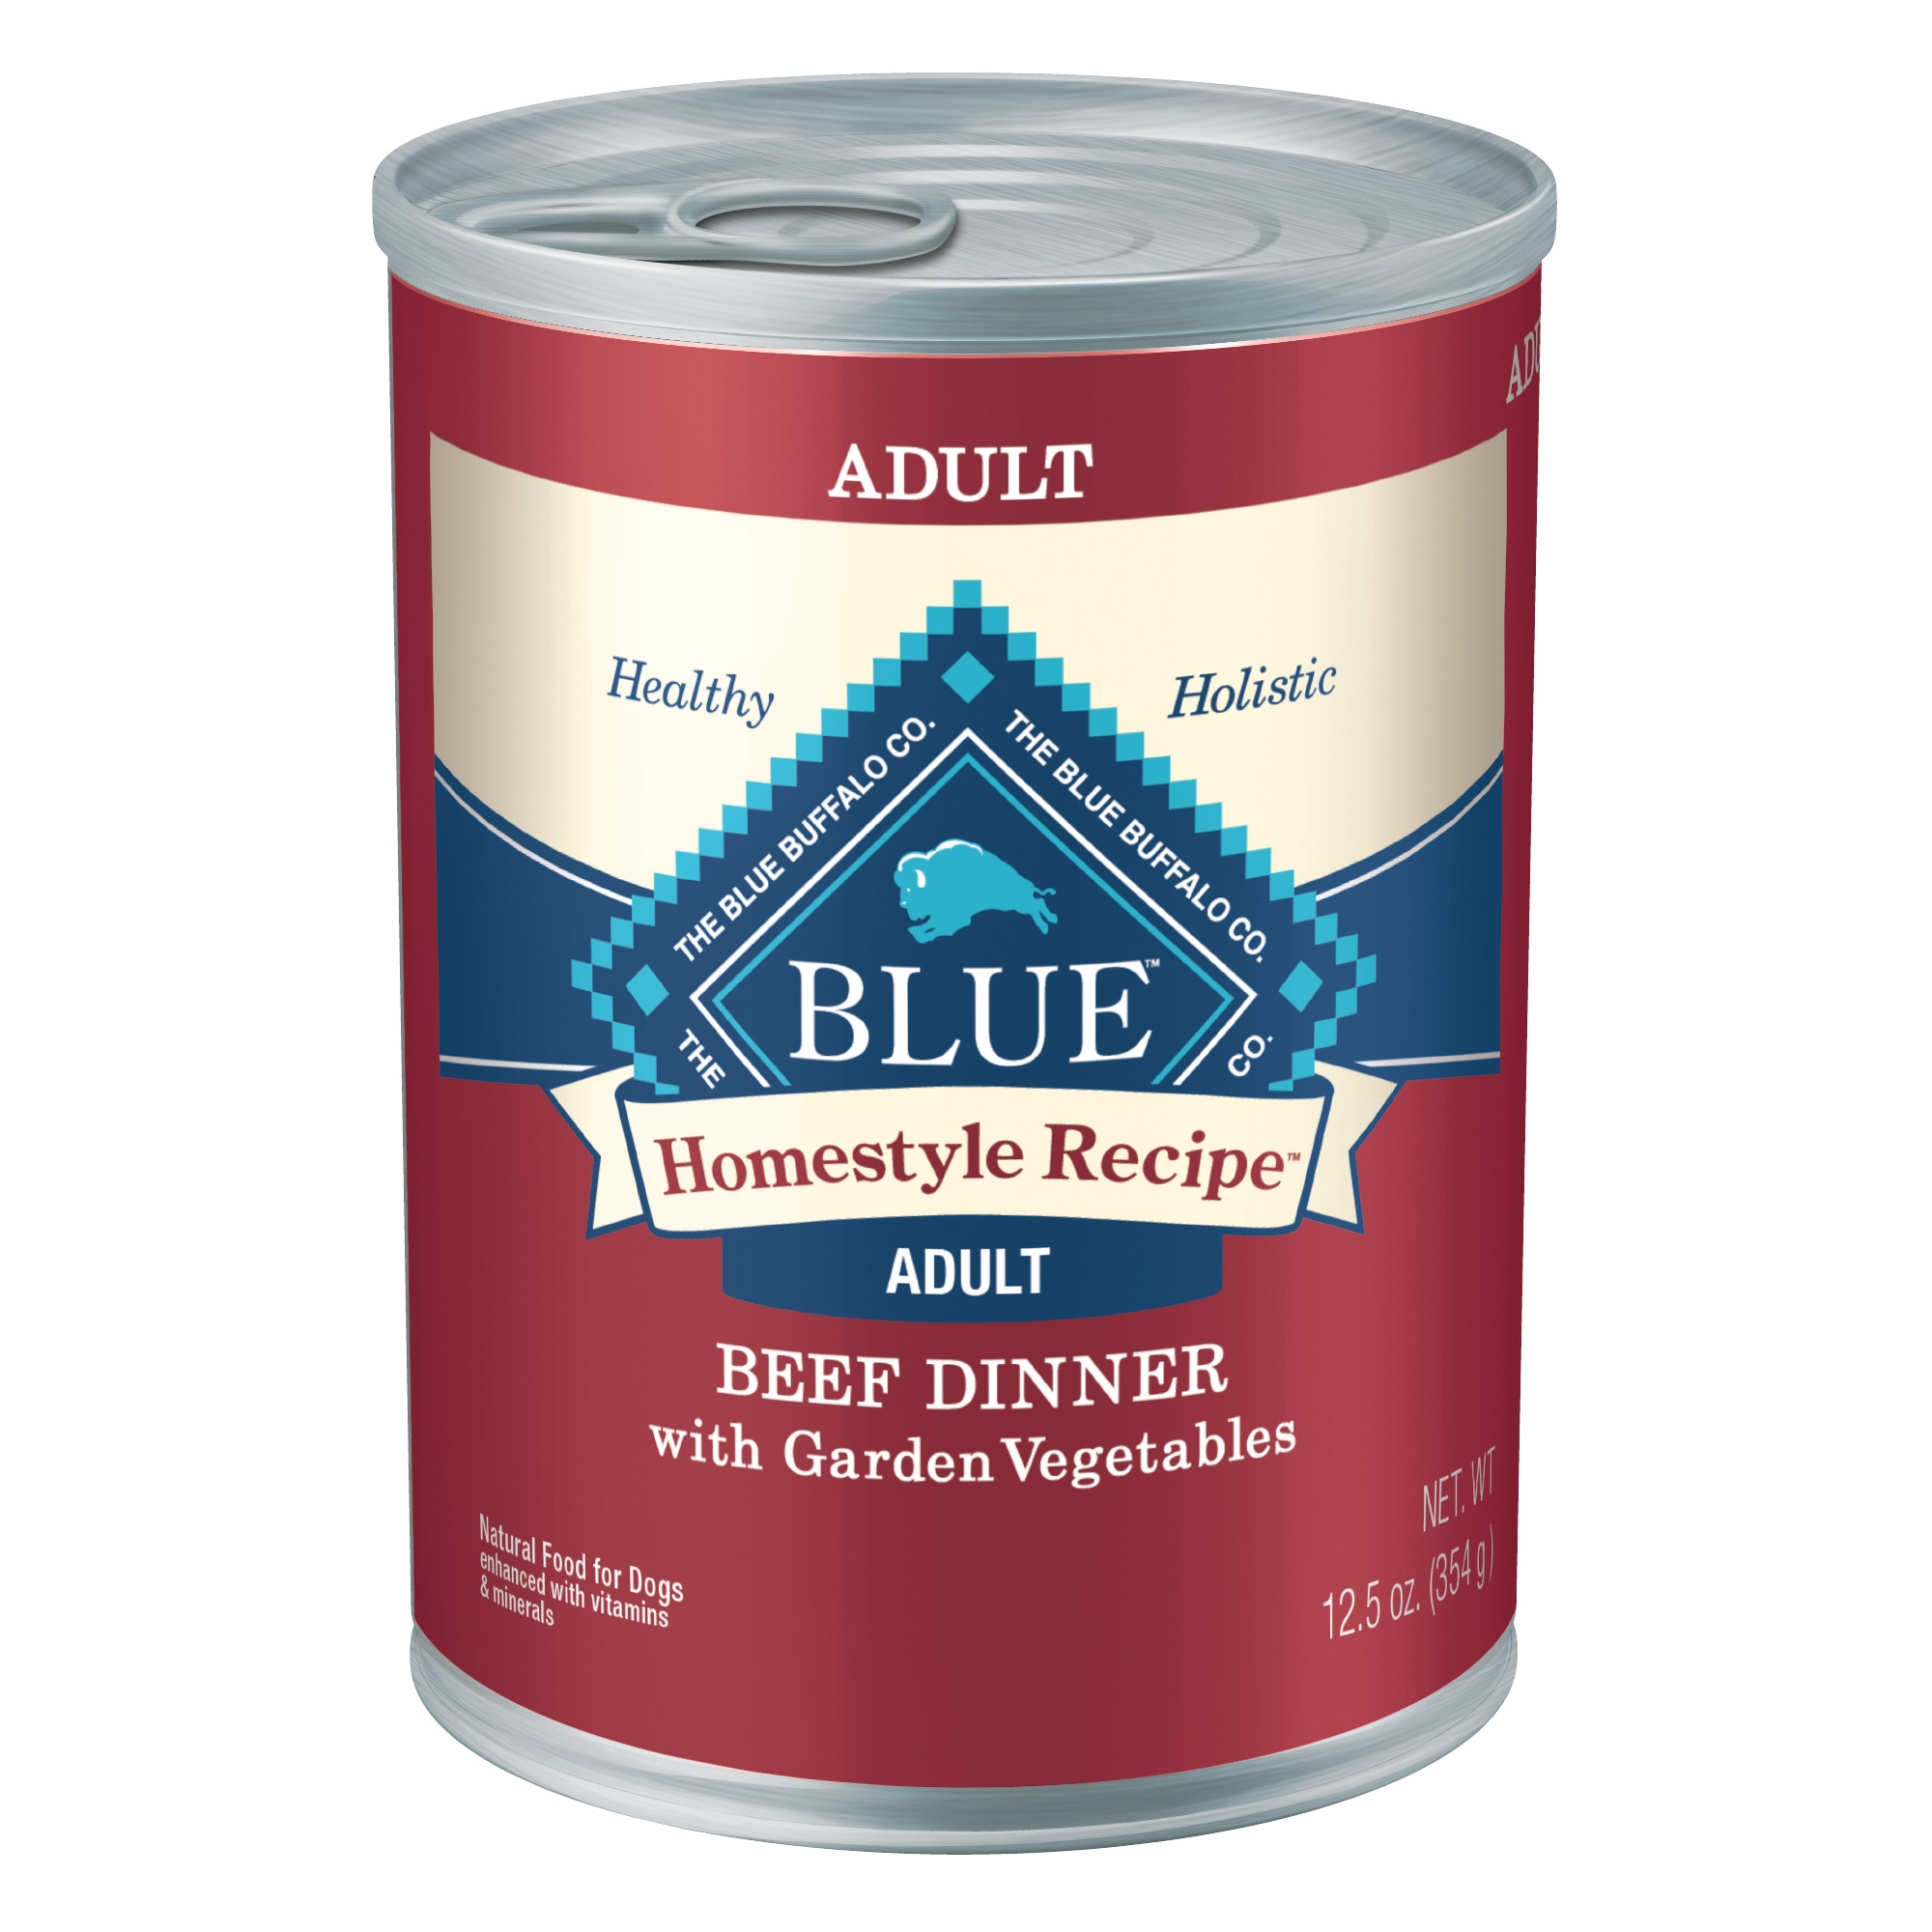 BLUE Homestyle Recipe Beef Dinner with Garden Vegetables For Adult Dogs,